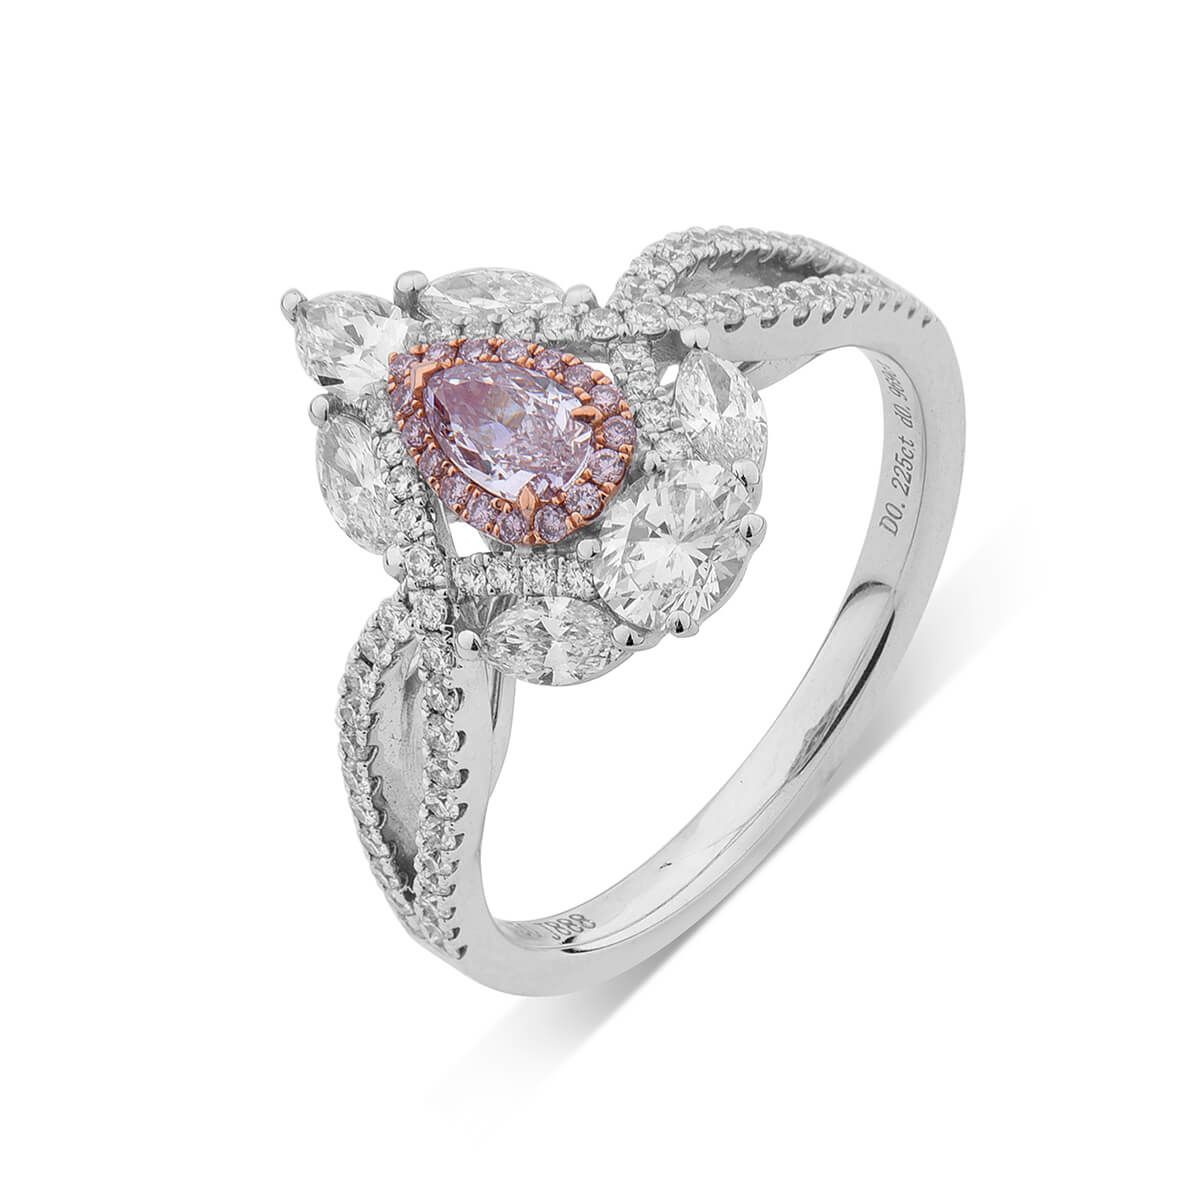 Faint Pink Diamond Ring, 1.20 Ct. TW, Pear shape, GIA Certified, 2185474480